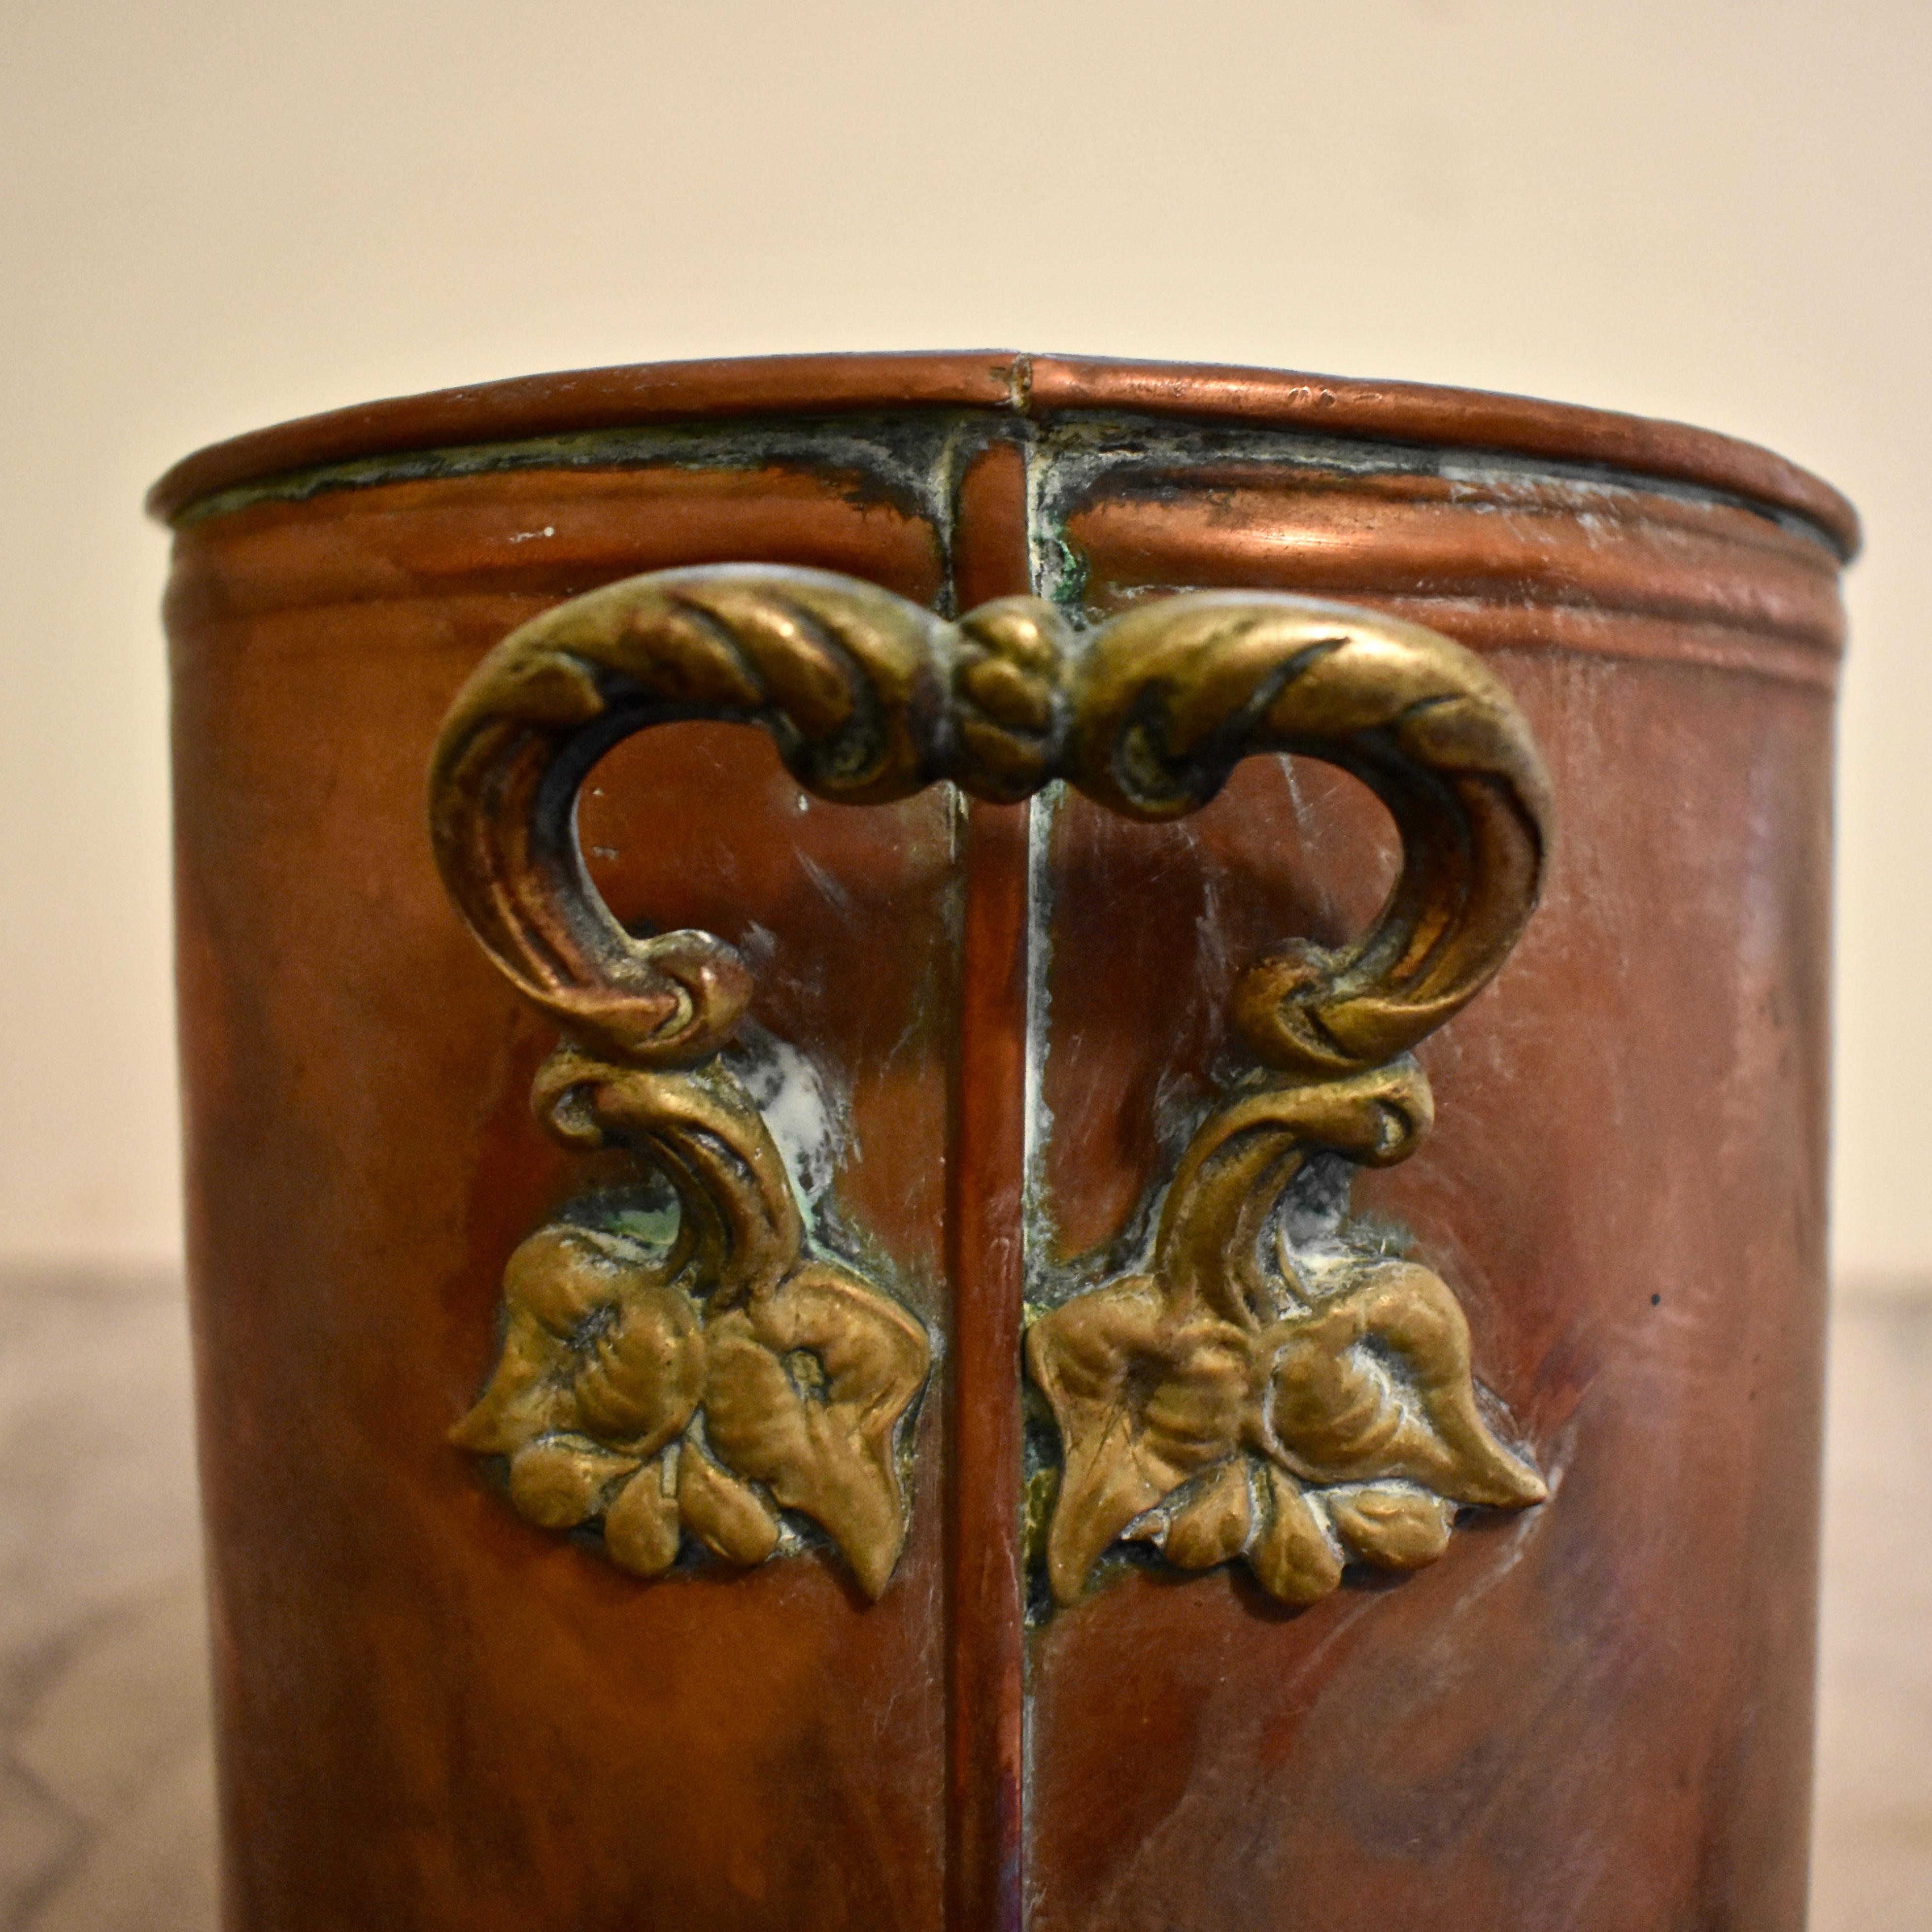 A long and heavy antique French copper potted plant holder, with a beautiful rich patina, circa early 1900s.

 Four round openings meant to hold terracotta pots, are cut into the top. The holder has rounded ends showing ornate floral brass side